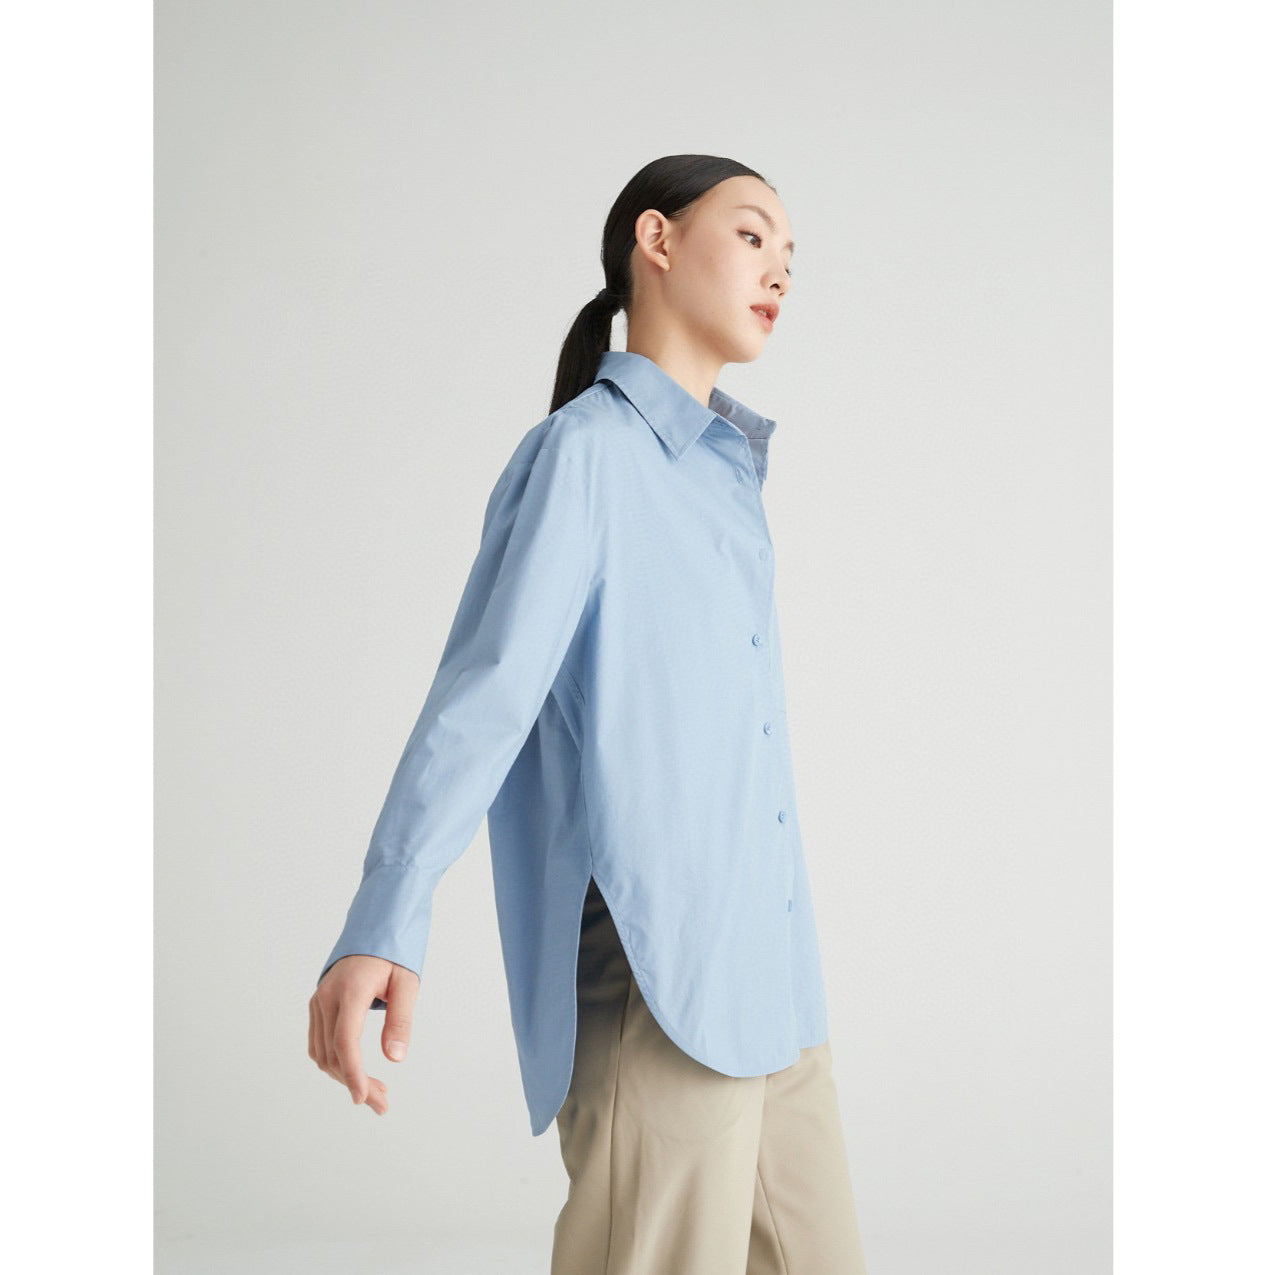 New Early Autumn Cotton Fit Shirt  UponBasics   